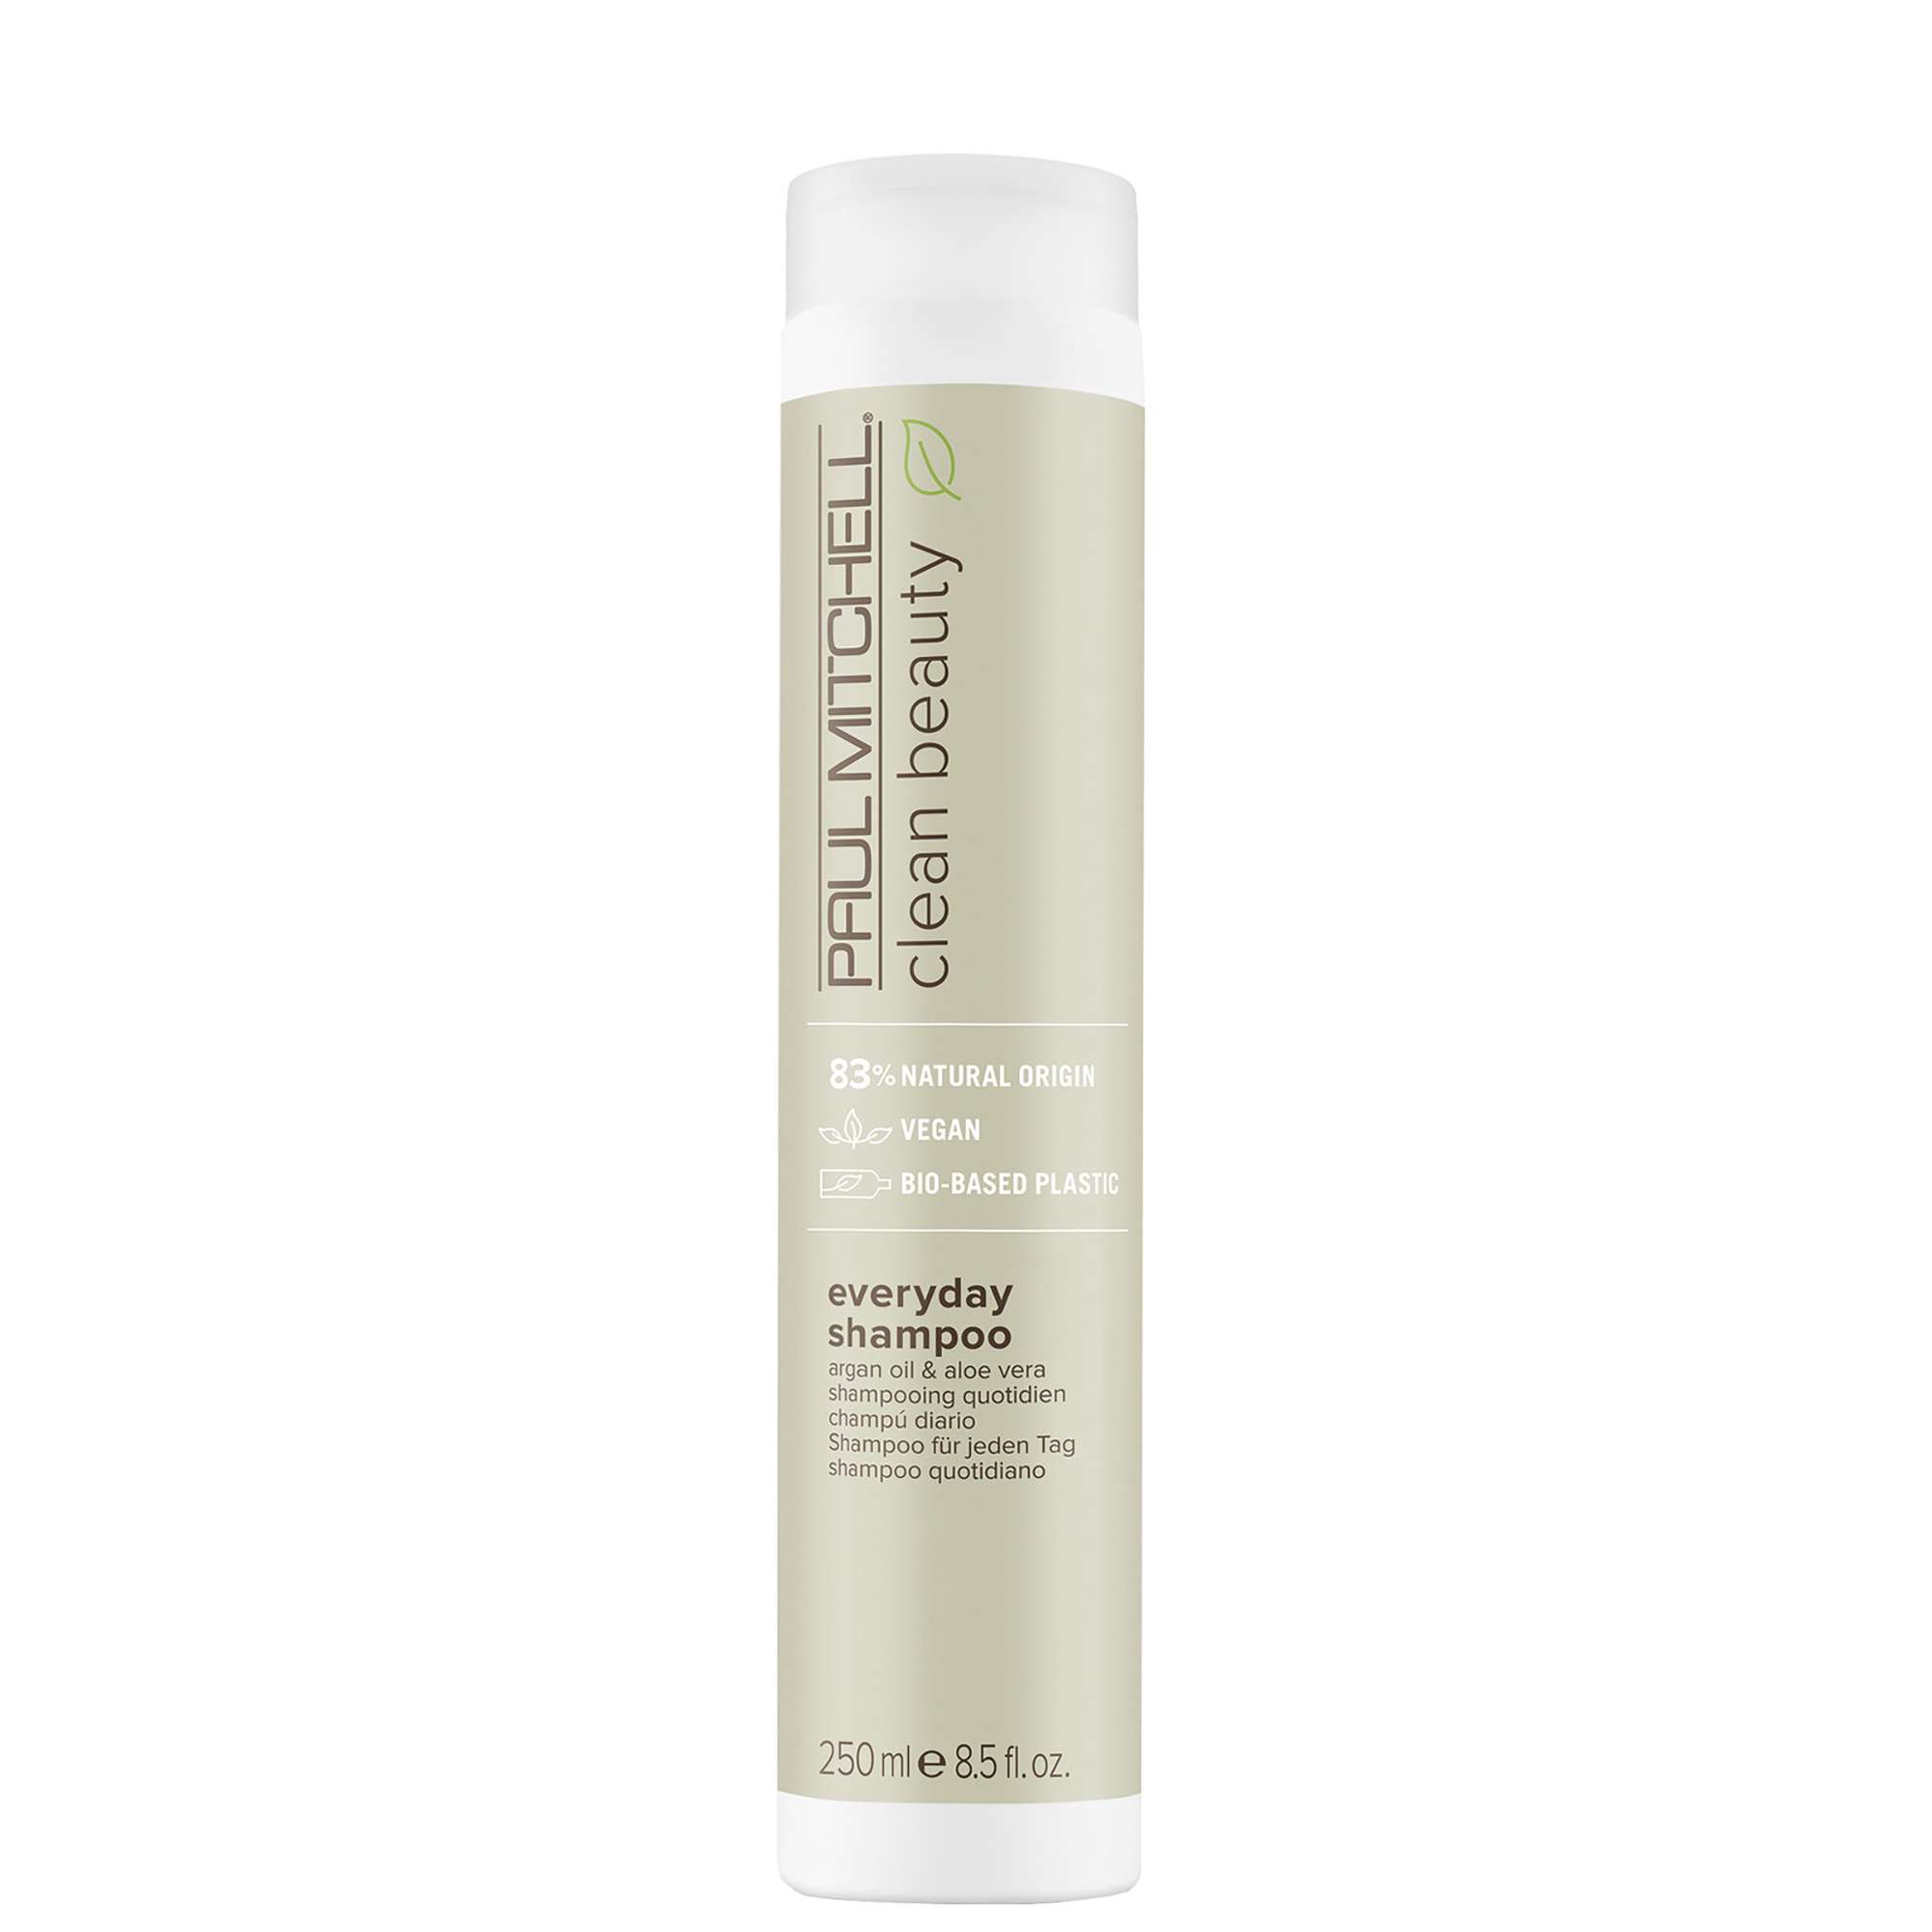 Image of Paul Mitchell Clean Beauty Everyday Shampoo 250ml